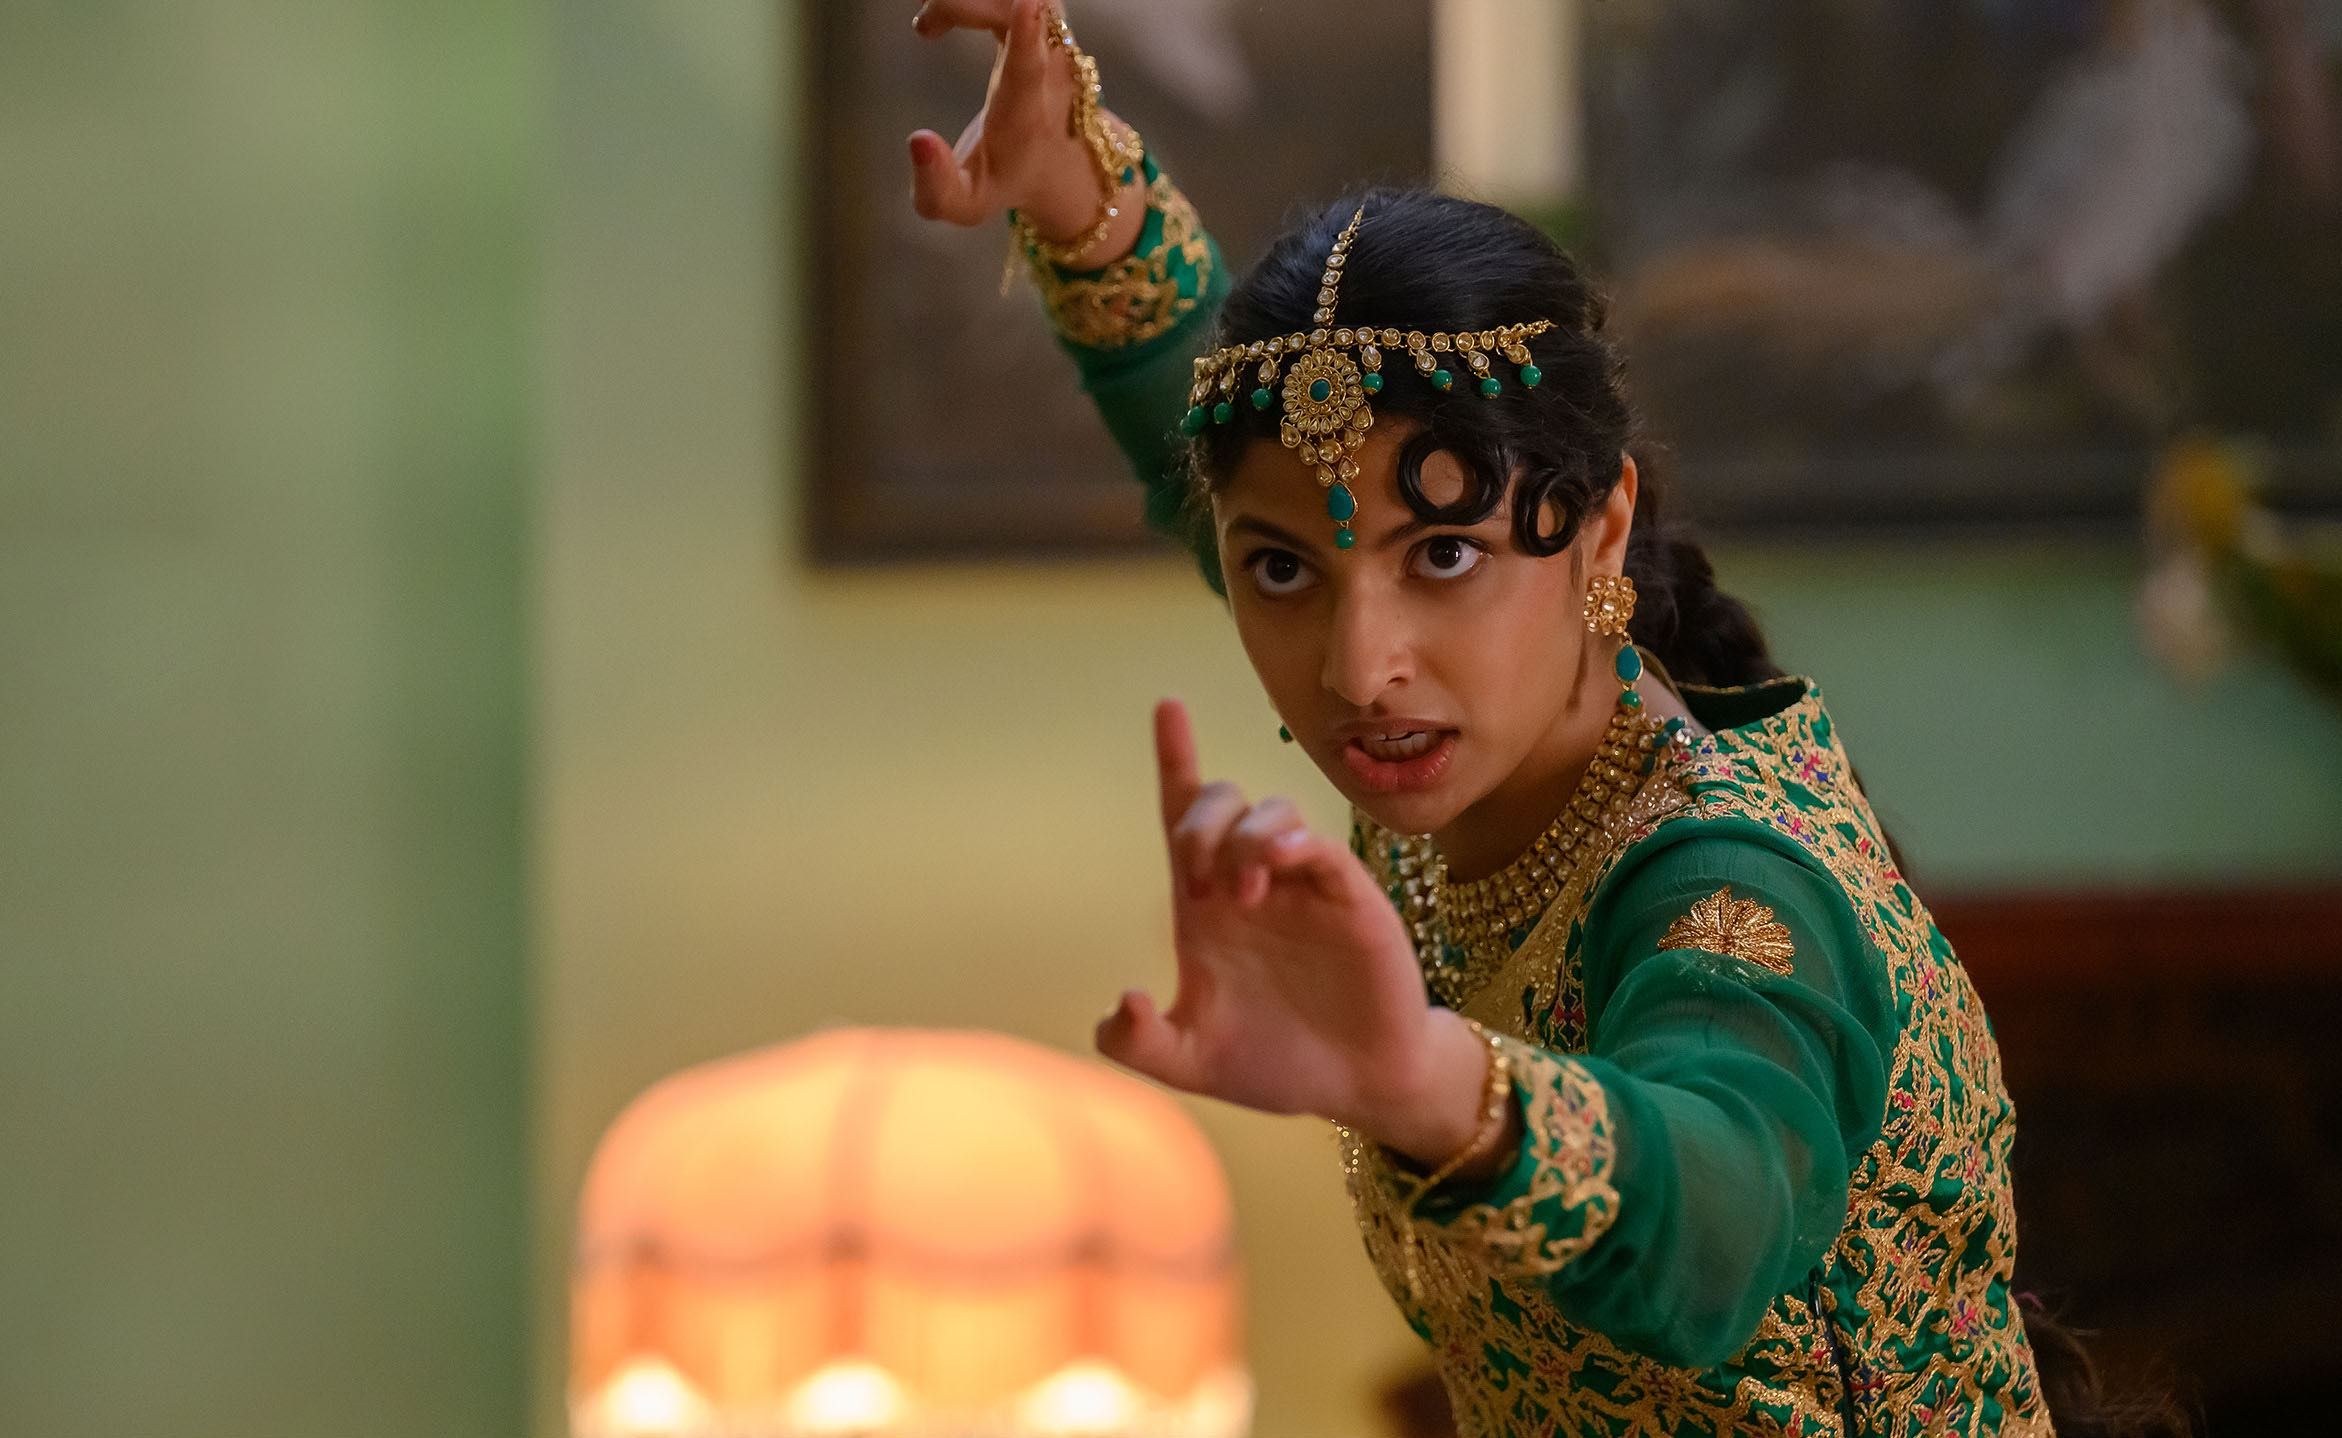 Priya Kansara shows off mad martial arts moves in full marriage regalia in "Polite Society"  / Photo credit: Tariza Pahizadeh, Focus Features